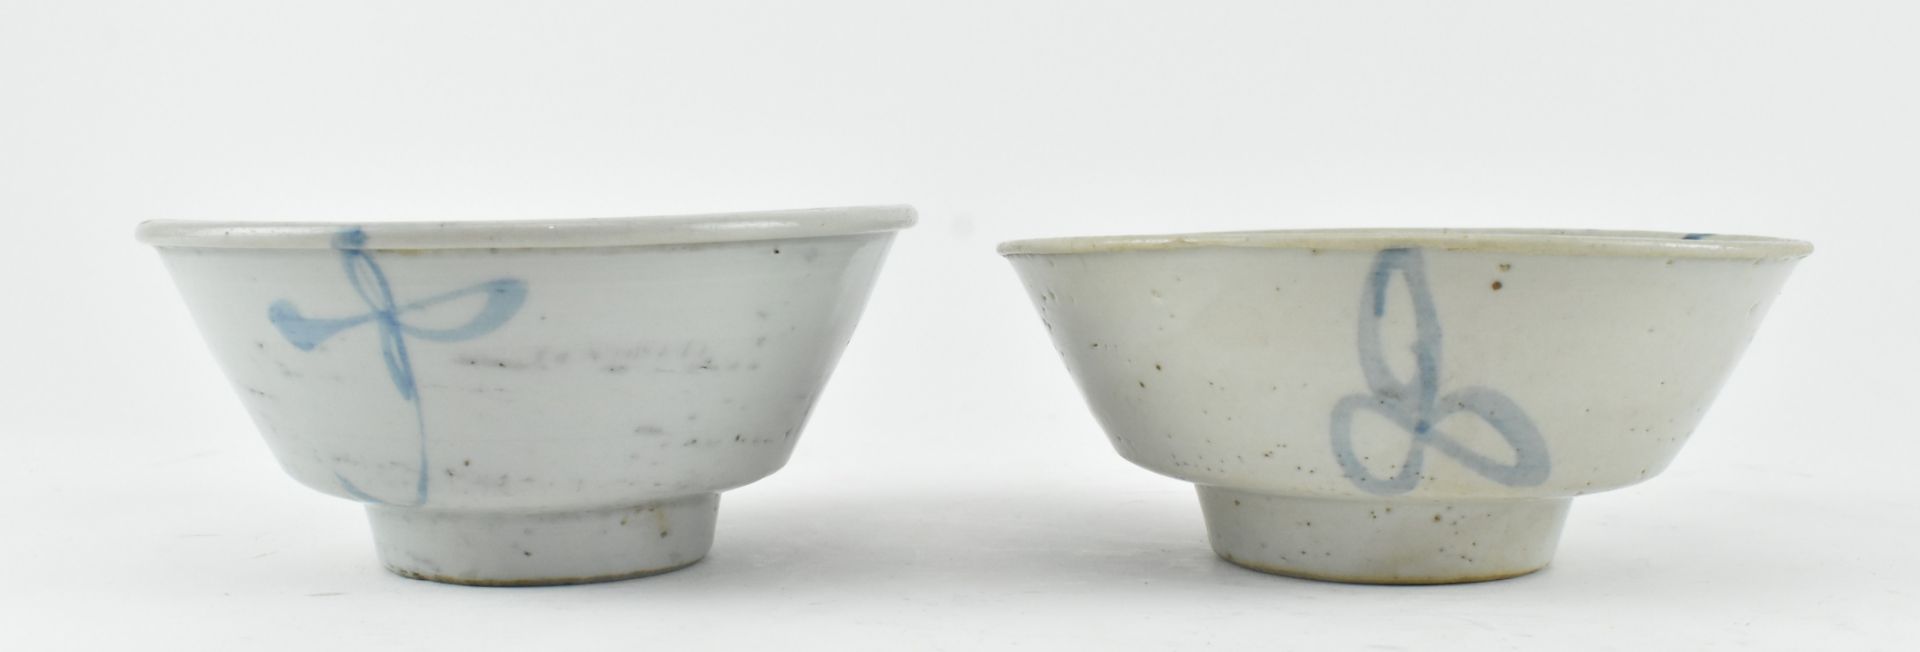 TWO ZHANGZHOU SWATOW WARE BLUE AND WHITE BOWLS 汕头碗两个 - Image 2 of 7